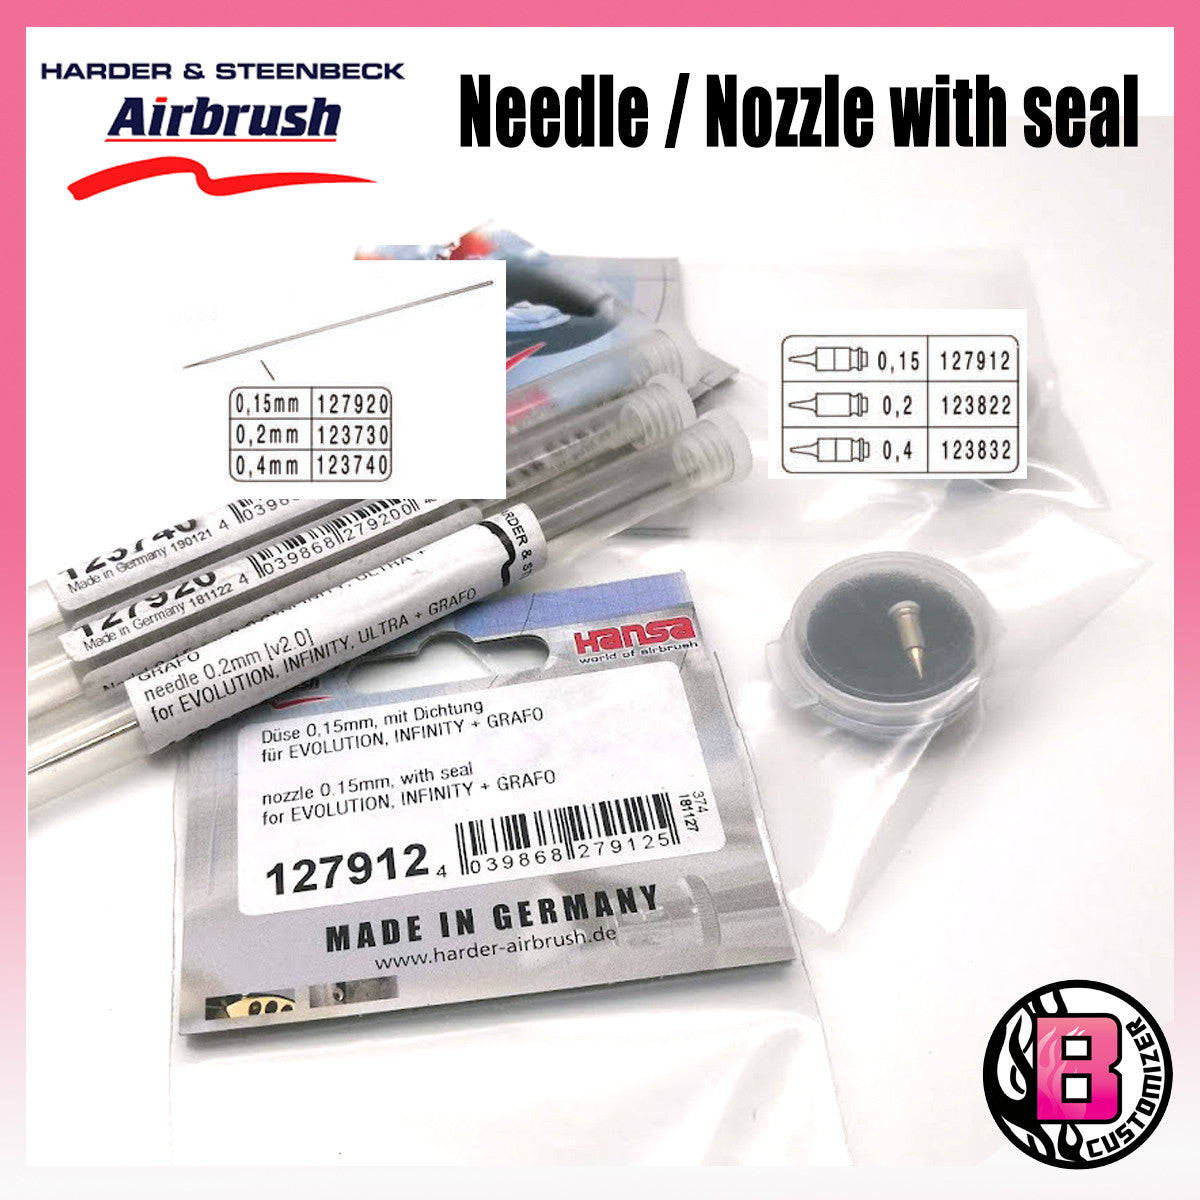 Harder & Steenbeck Needle / Nozzle with seal (accessories for Evolution, Infinity, Grafo and Geminus)